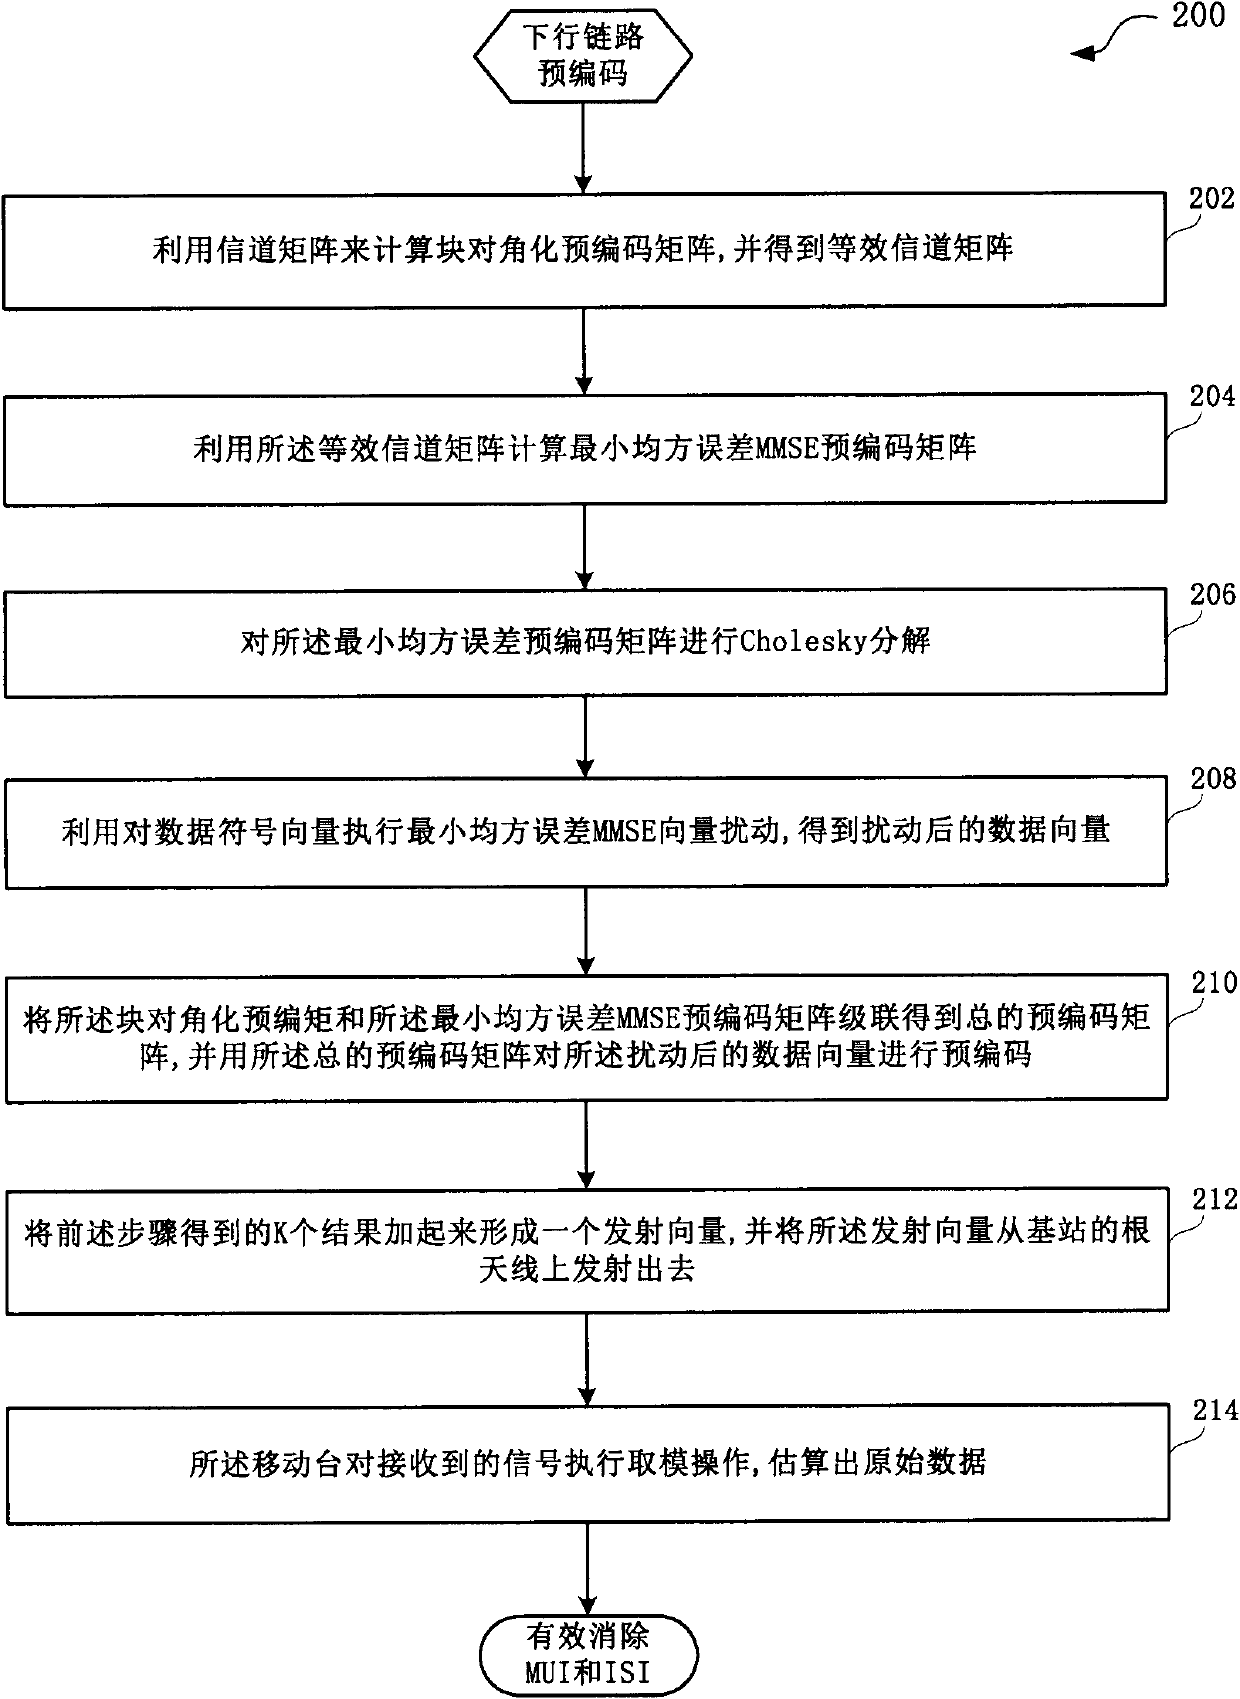 Method and system for precoding multi-user multi-input multi-output downlink